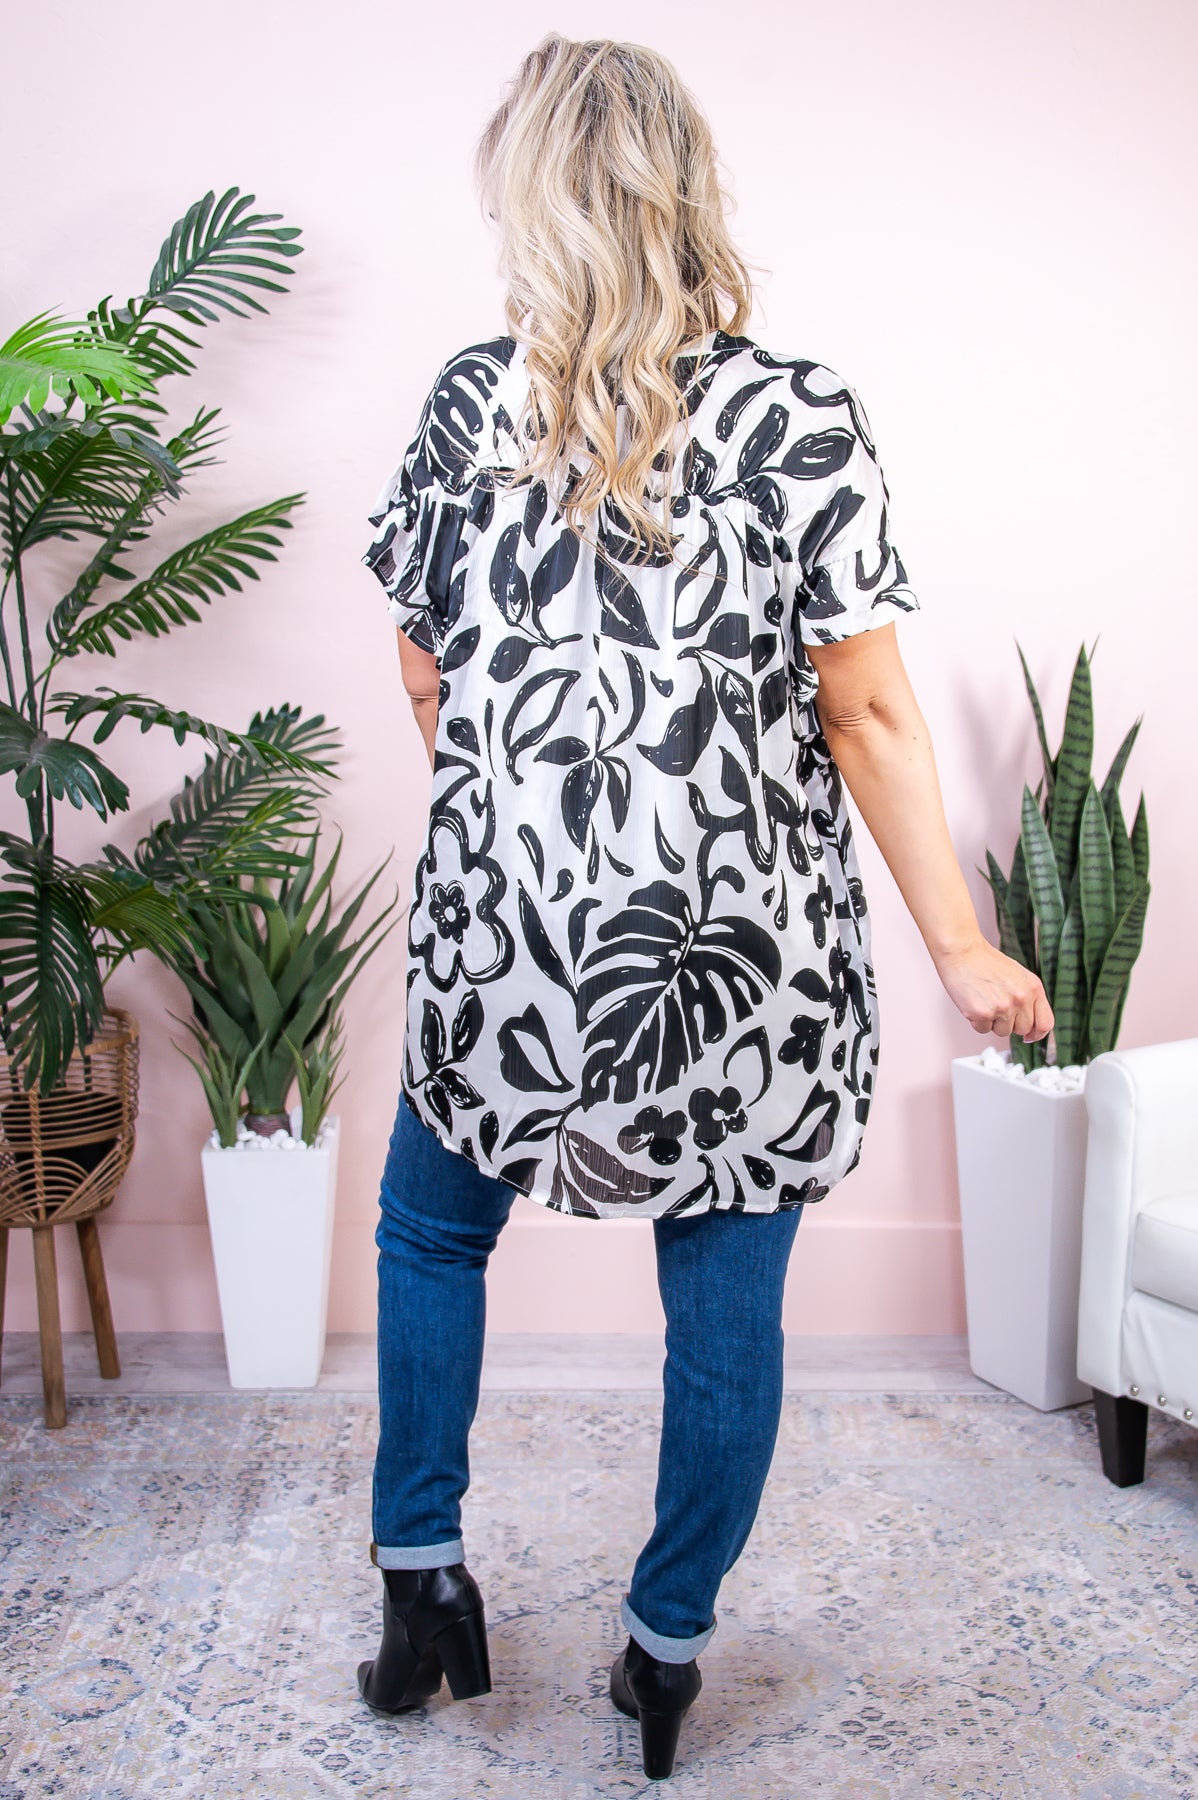 The Floral - Epitome Neck Class T8854BK V Tunic Black/Ivory Of